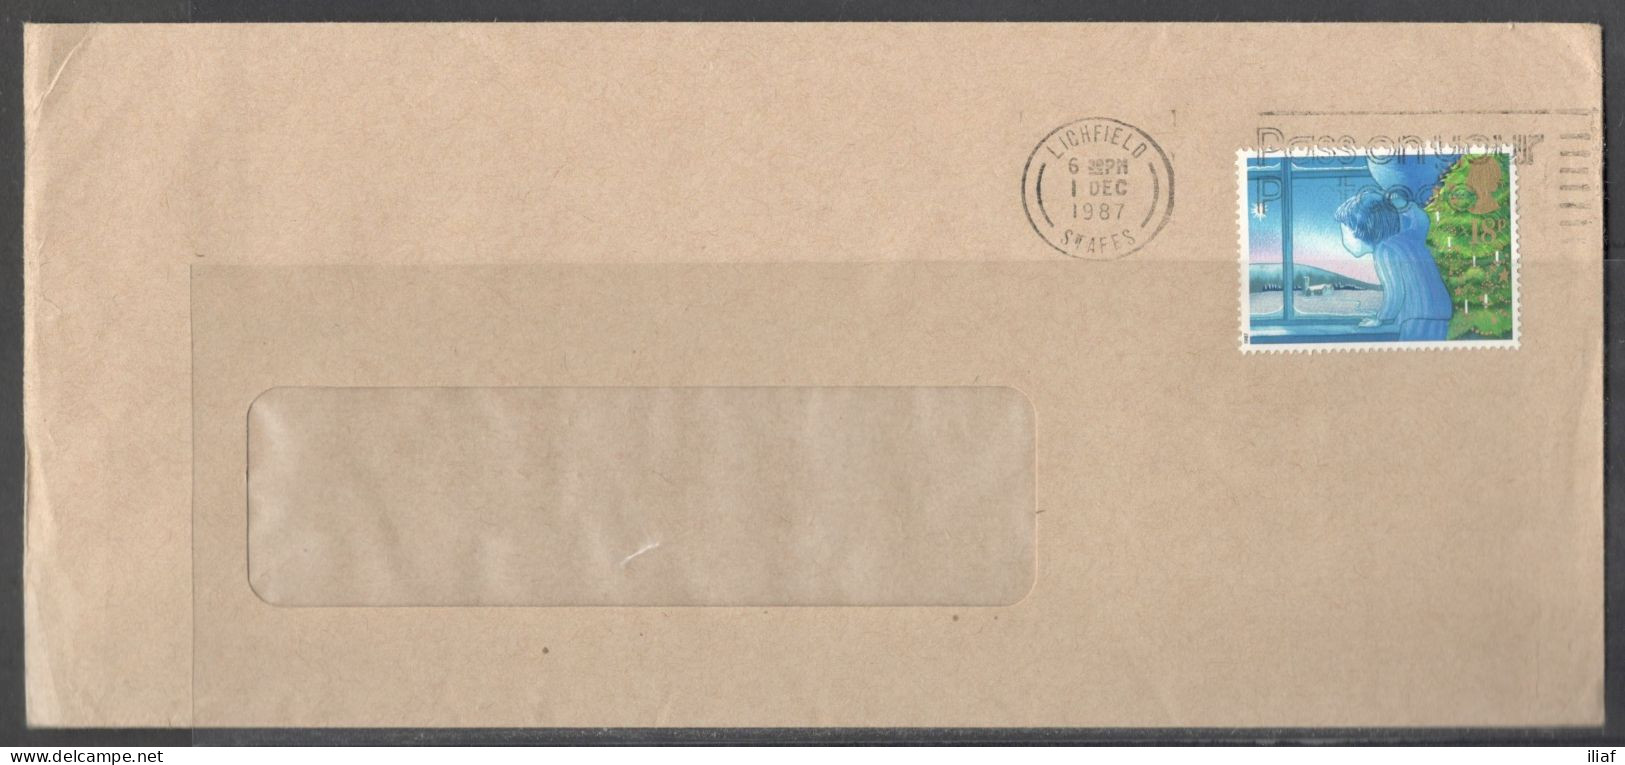 Great Britain - United Kingdom. Stamp Sc. 1197 On Letter, Sent From Lichfield On 1.12.87 - Storia Postale